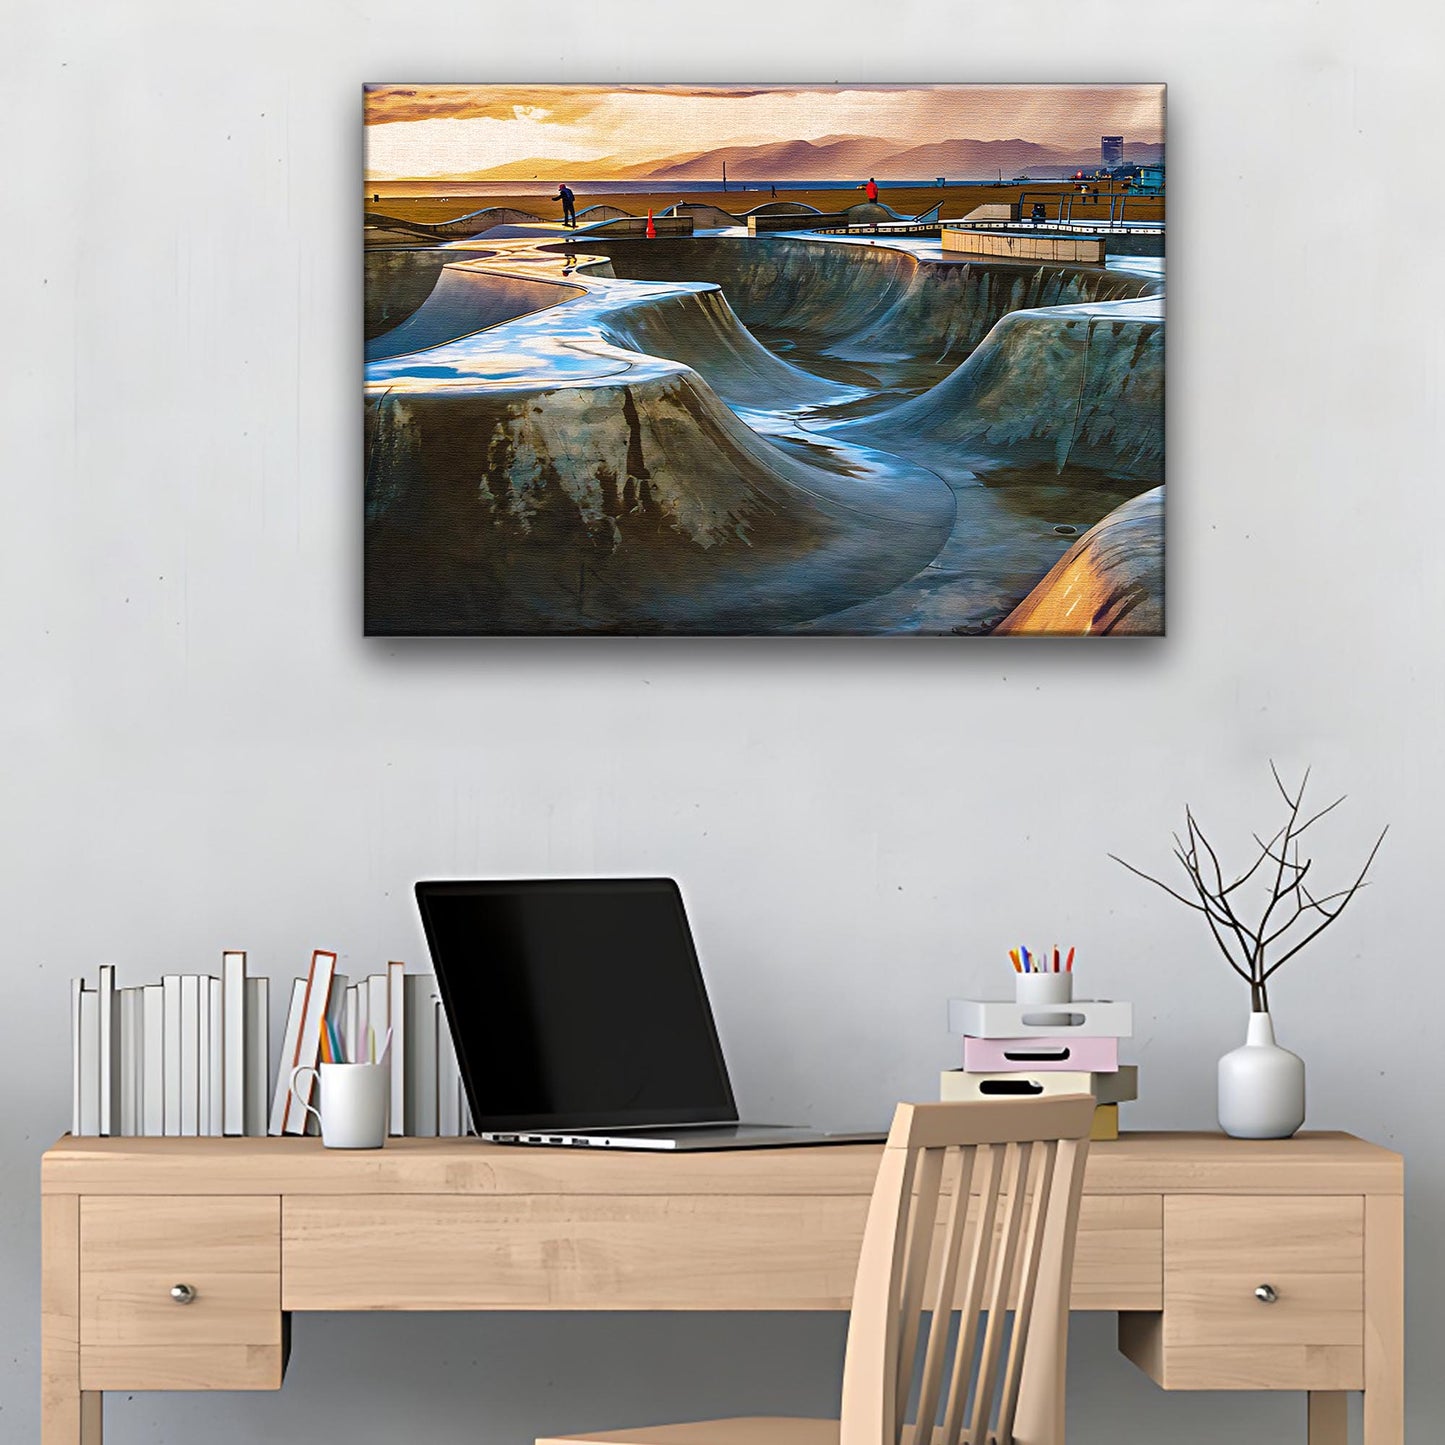 Skateboard Skate Park Canvas Wall Art  - Image by Tailored Canvases